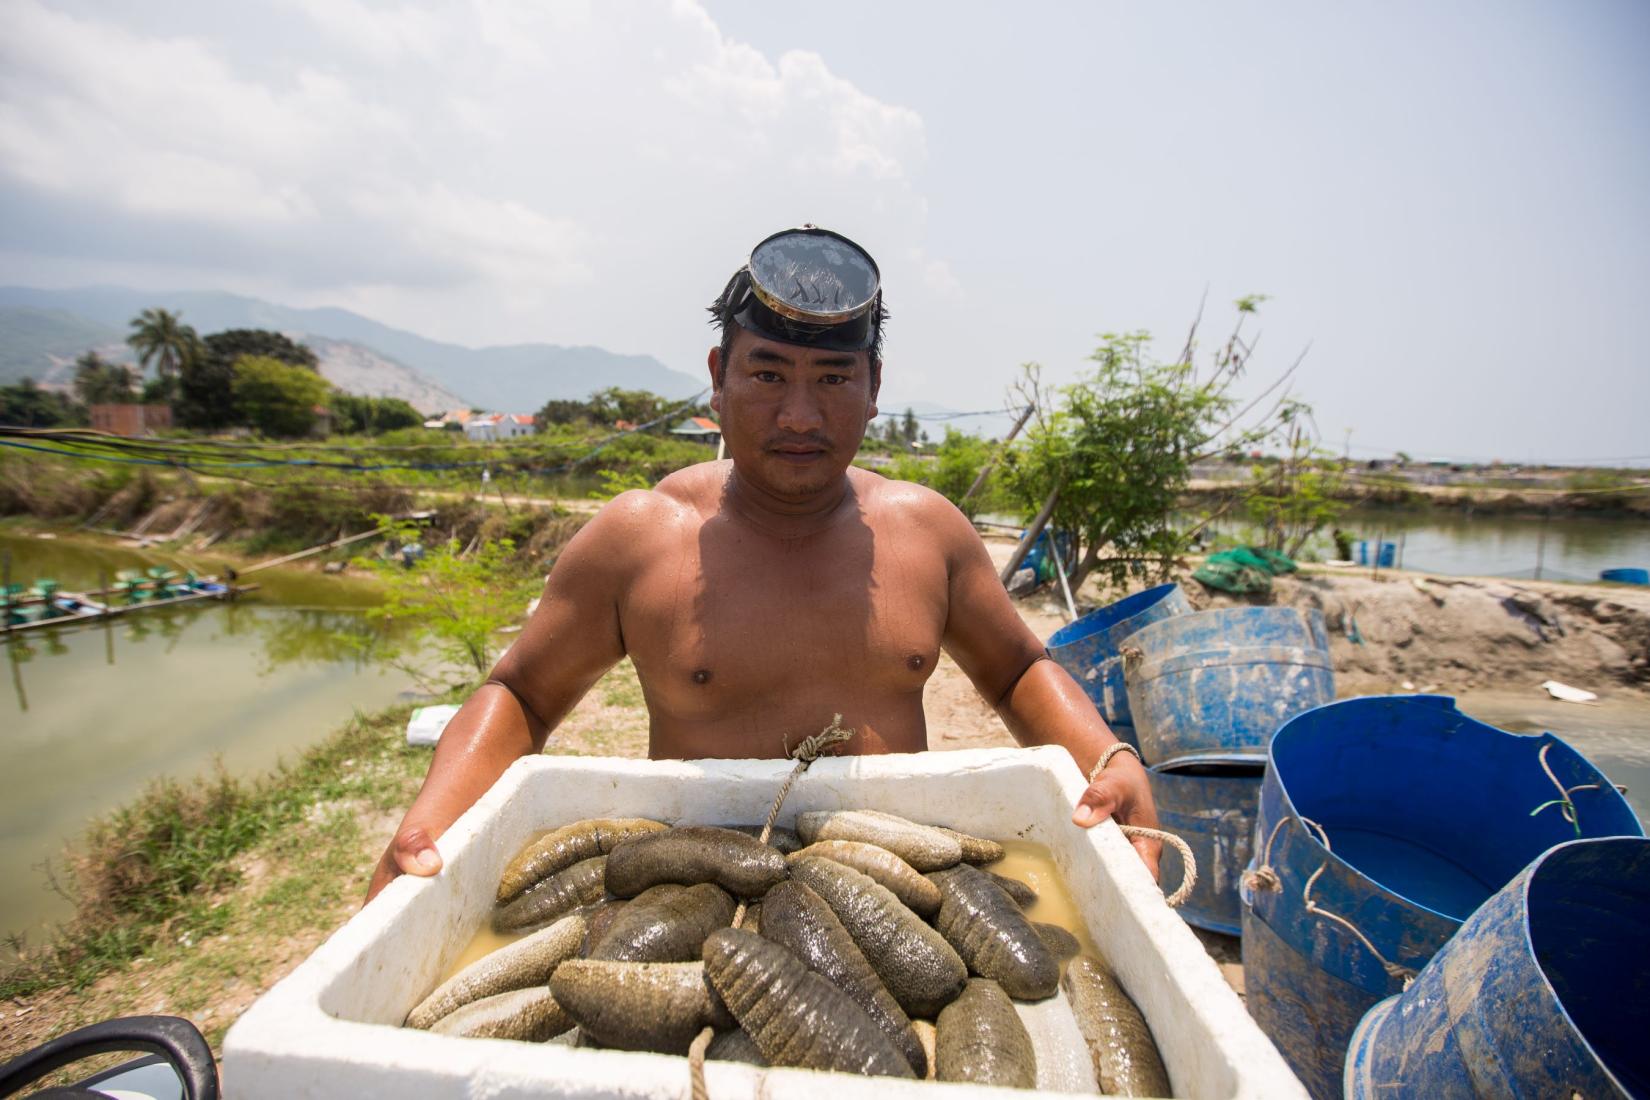 A man displaying a tub of freshly harvested sea cucumber.